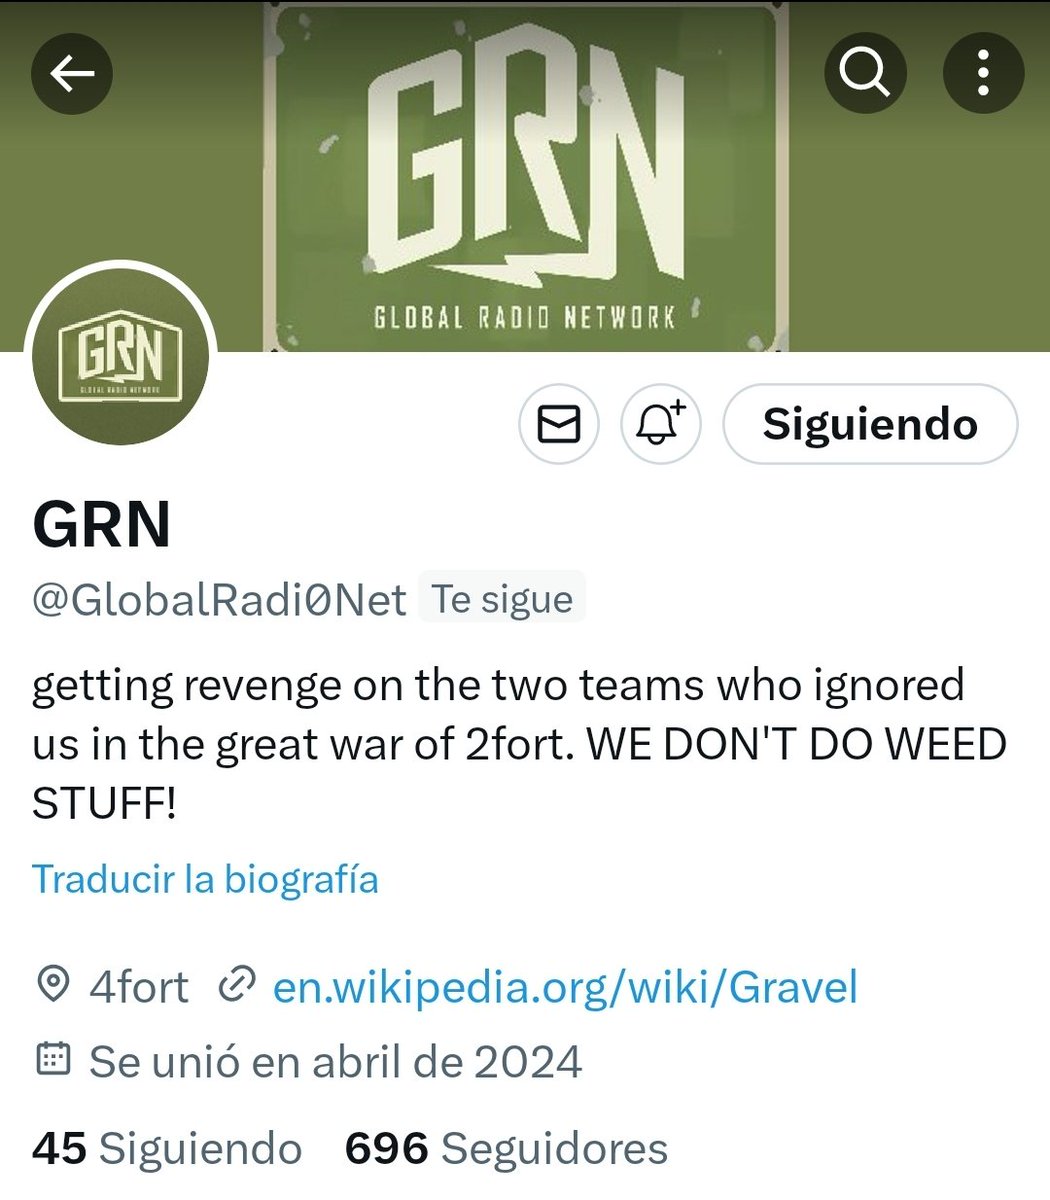 WE WON THE BATTLE AGAINST GRN!!
WE DID IT YARD LOGISTIC WORKERS!
WE WON THE WAR!!